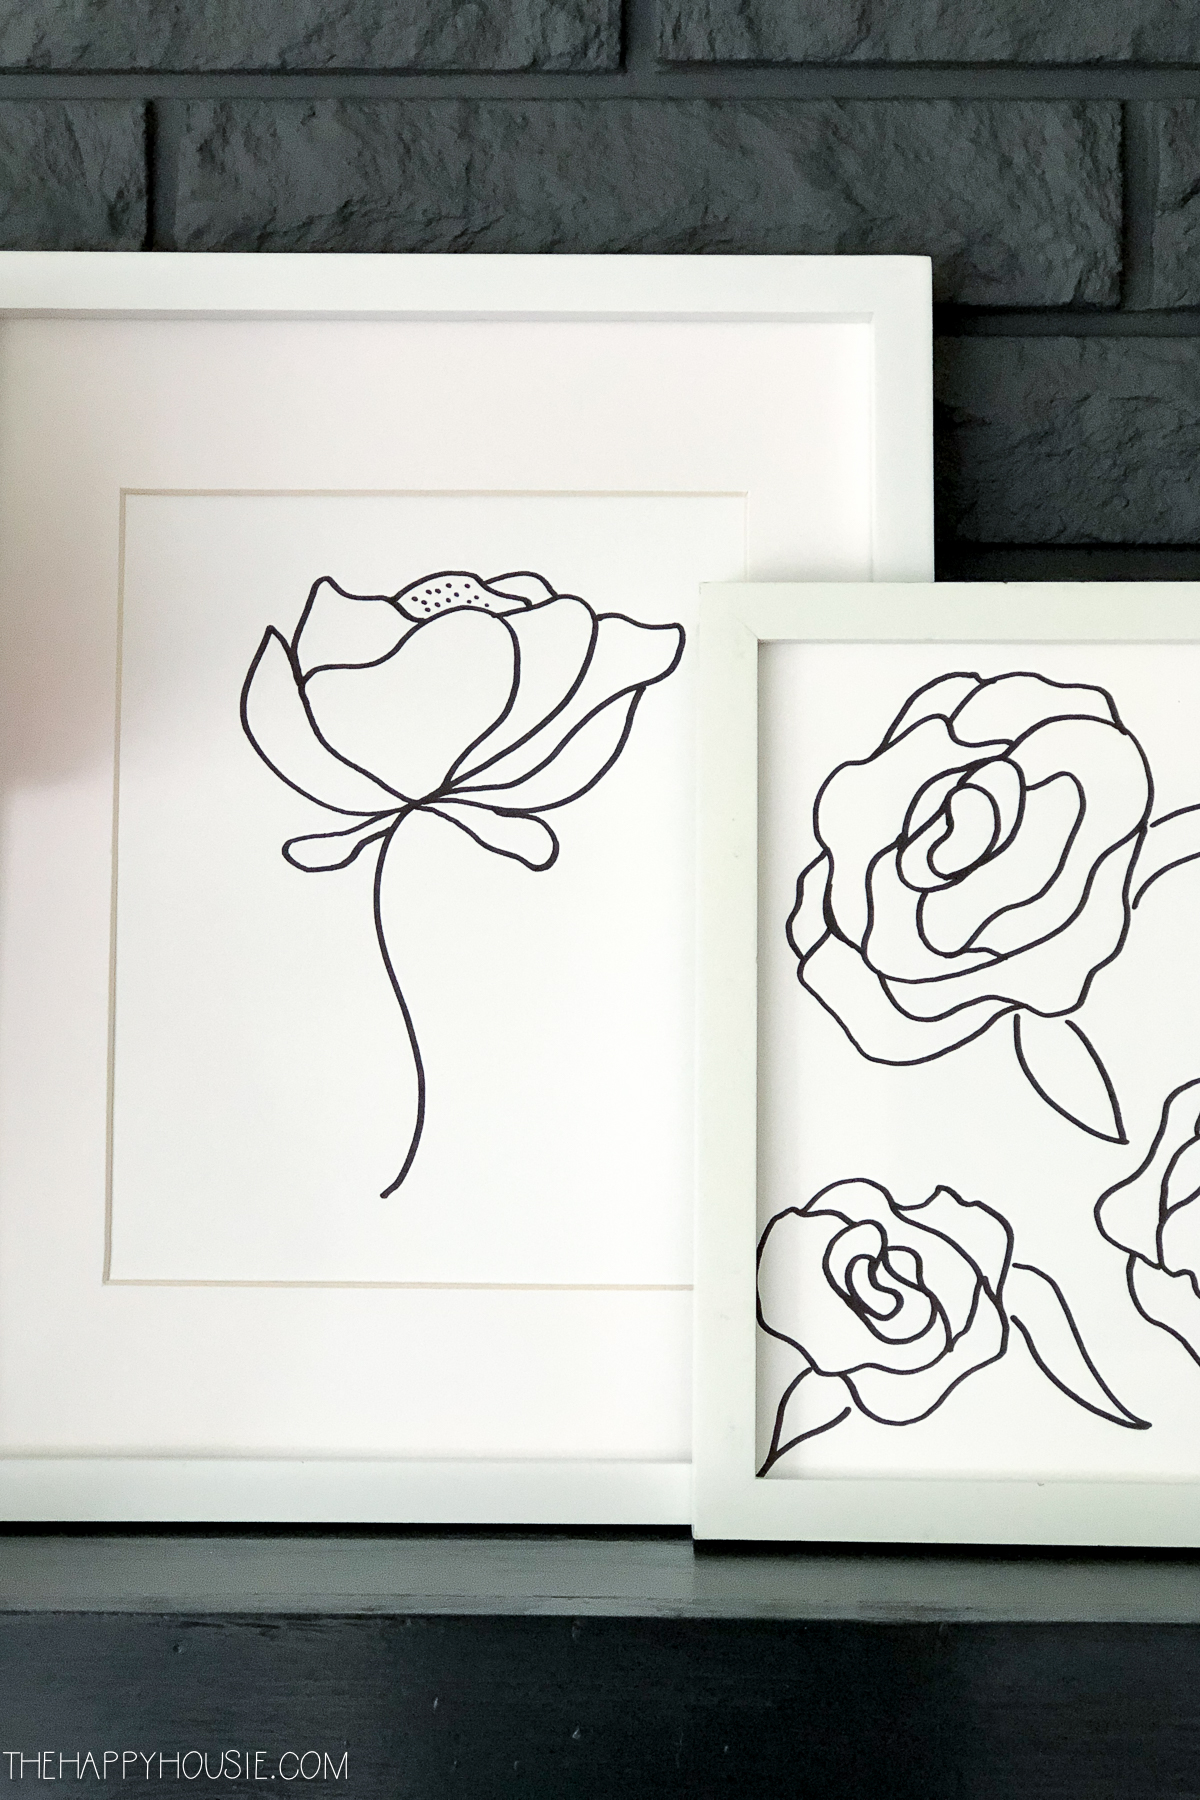 The white framed peony line drawings are on the mantel.